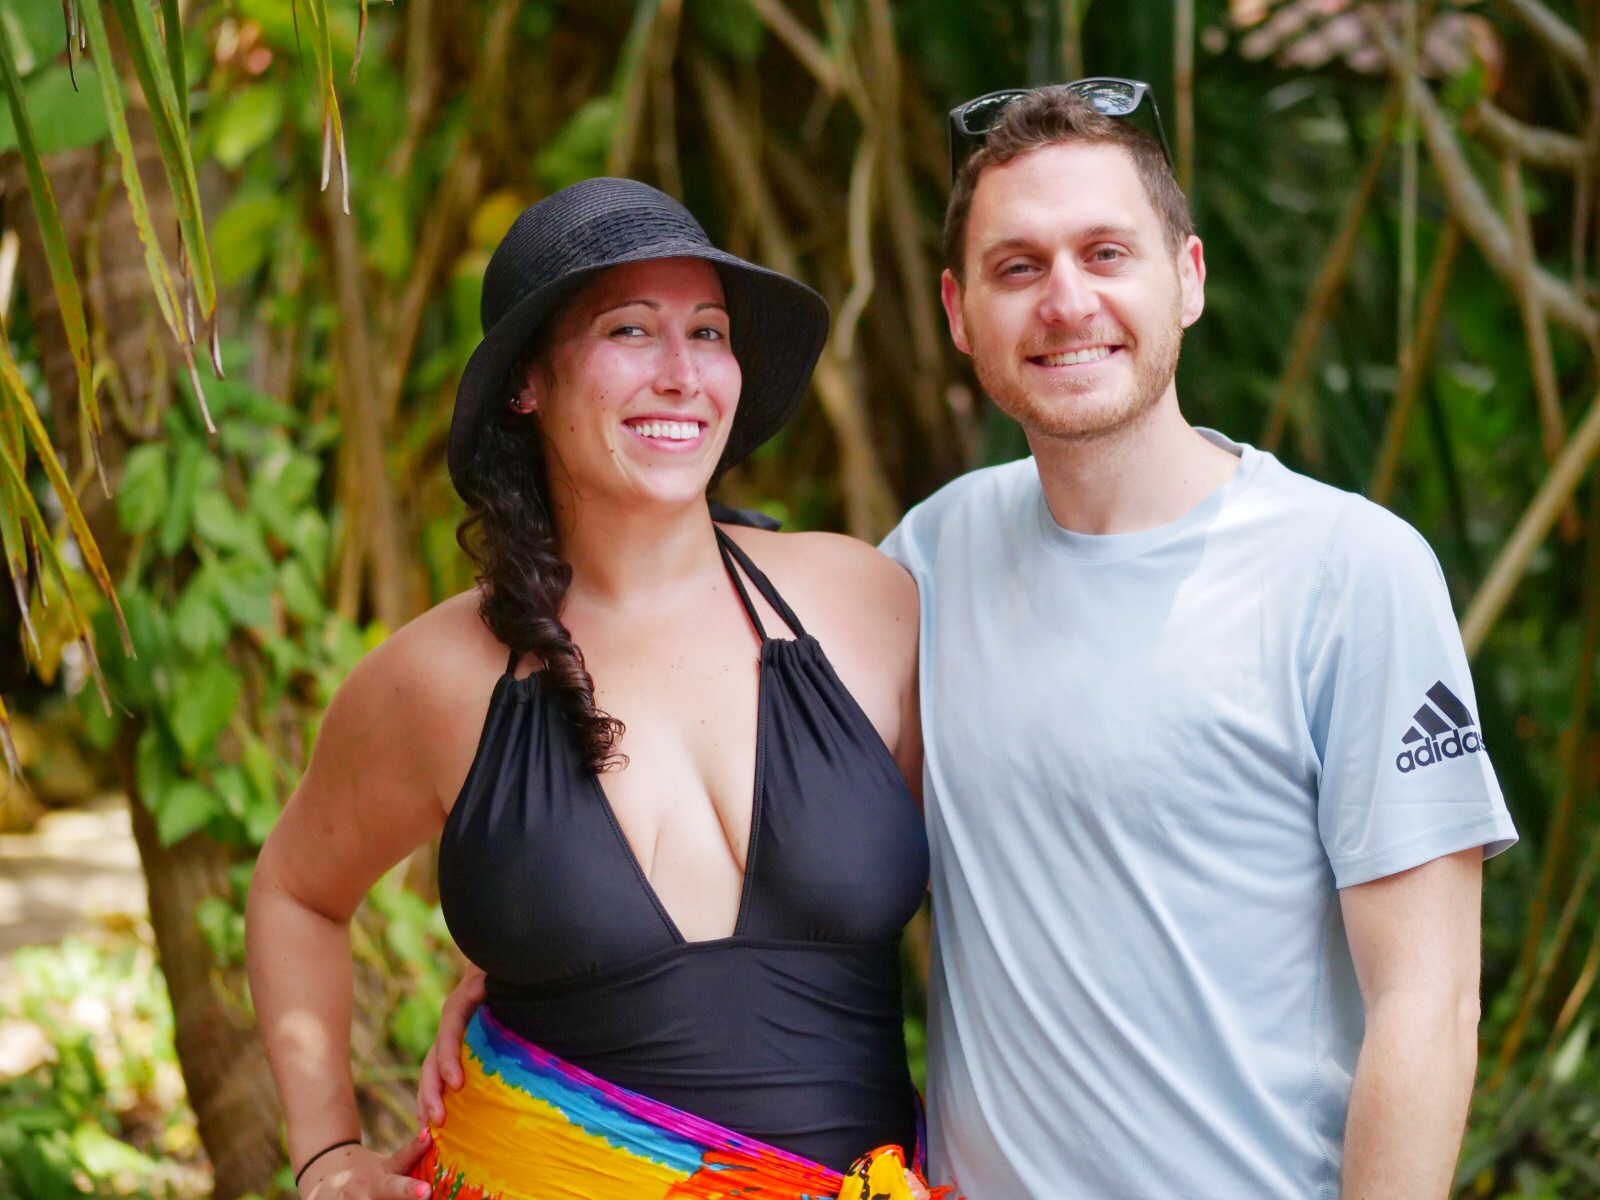 Shayna and Mor in the Yoga & Adventure Retreat 2019 in Belize